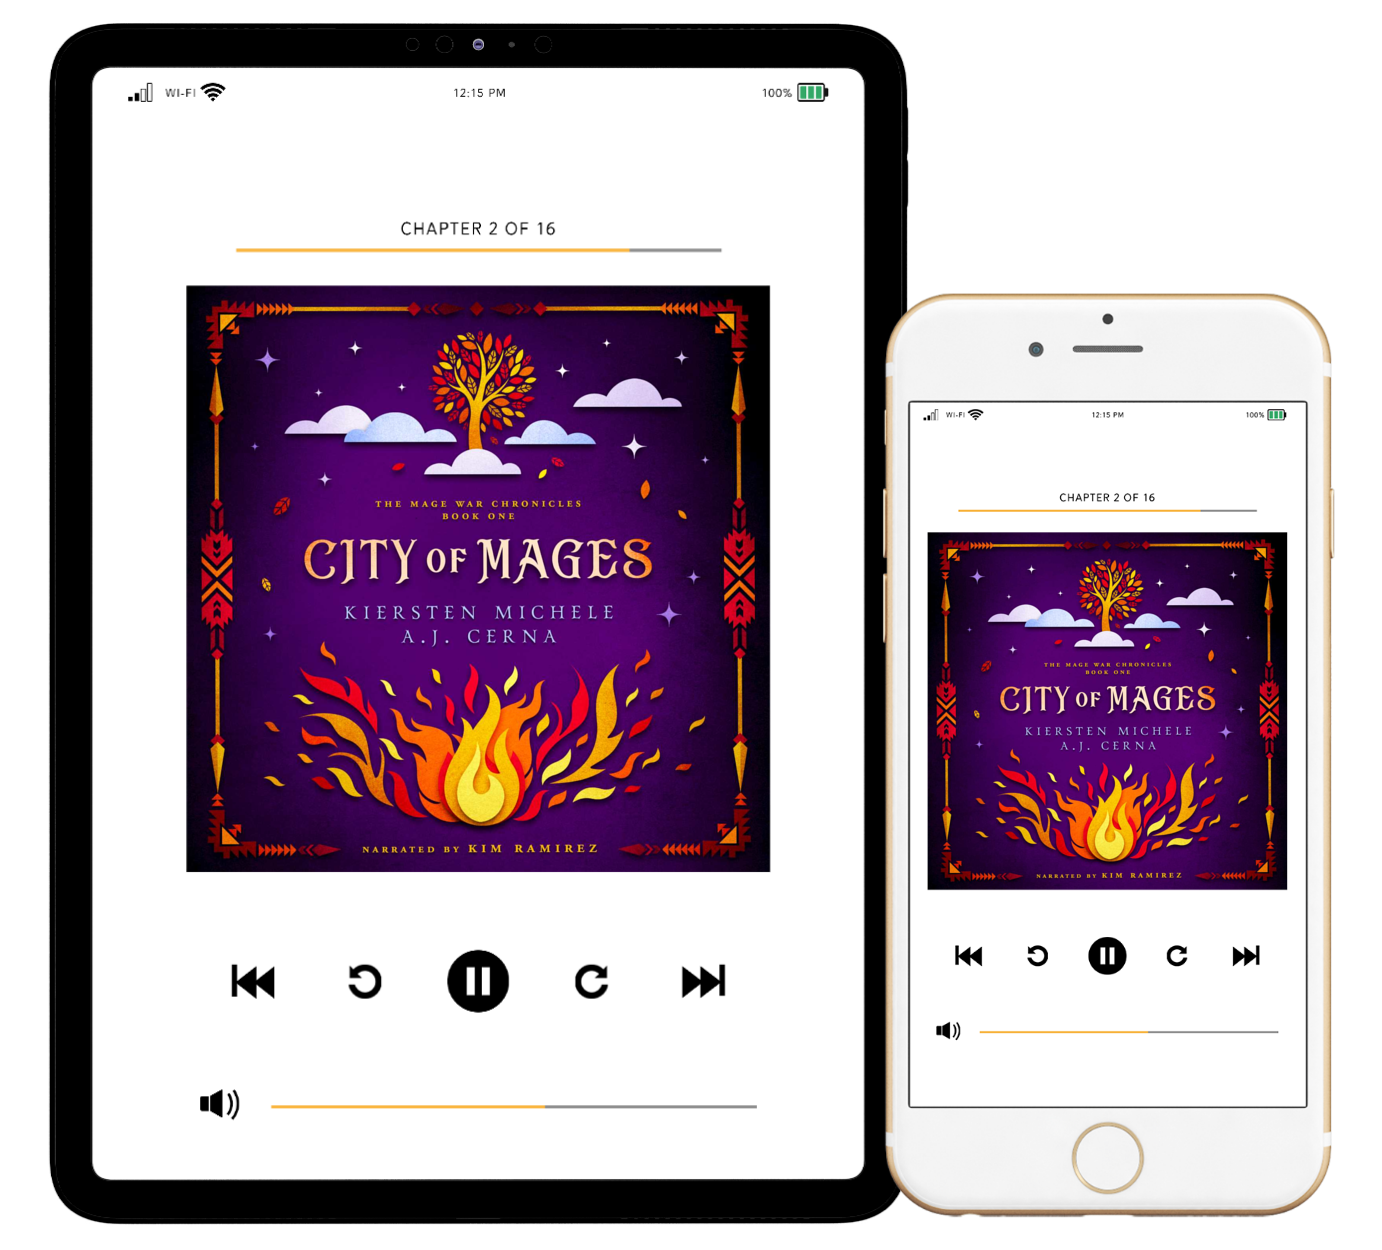 City of Mages: The Mage War Chronicles Book One (Audiobook)